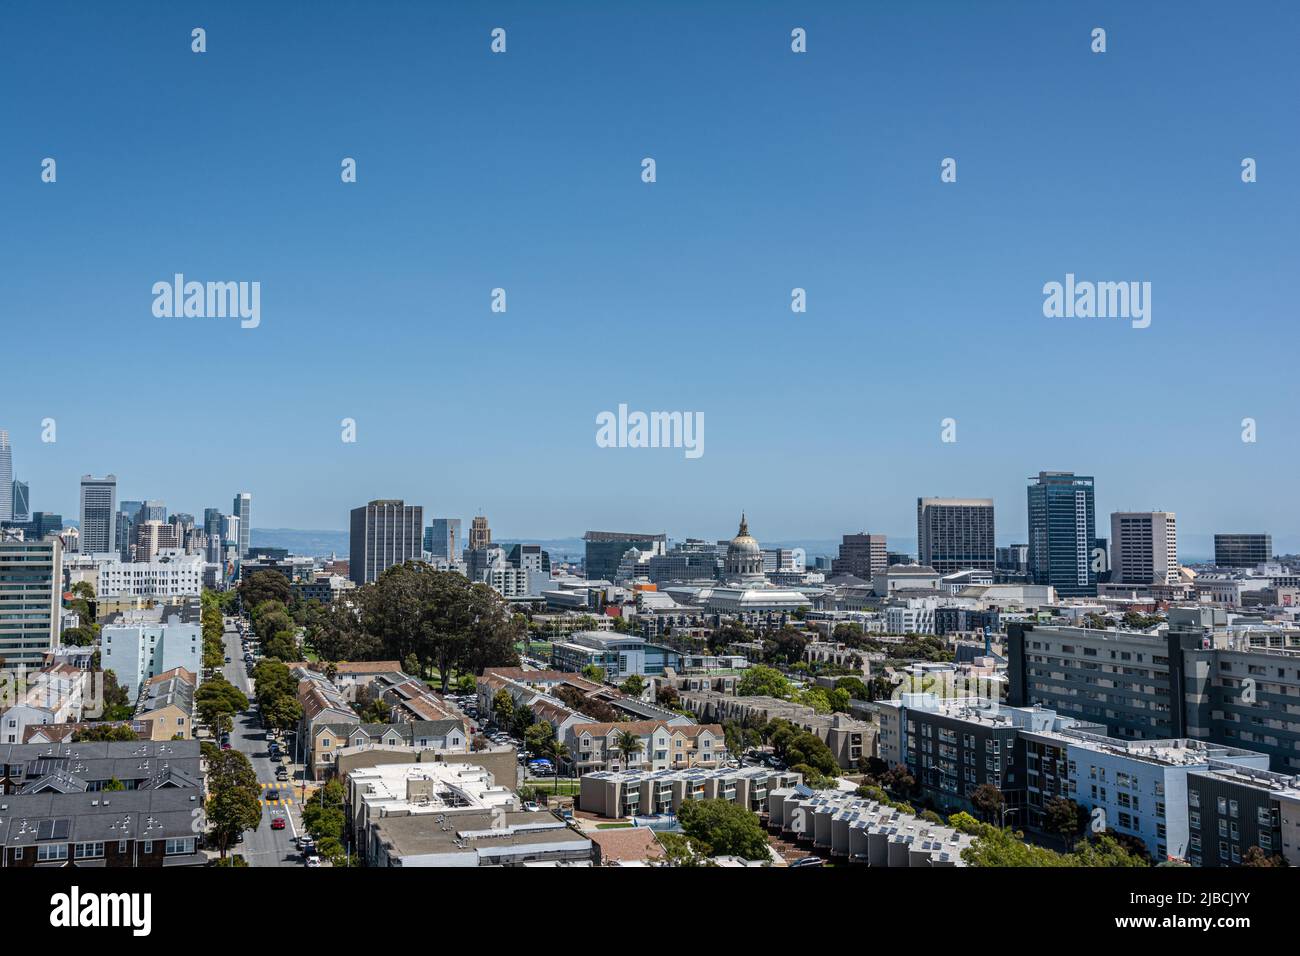 Panoramic view of Civic Center district from above, San Francisco, California Stock Photo